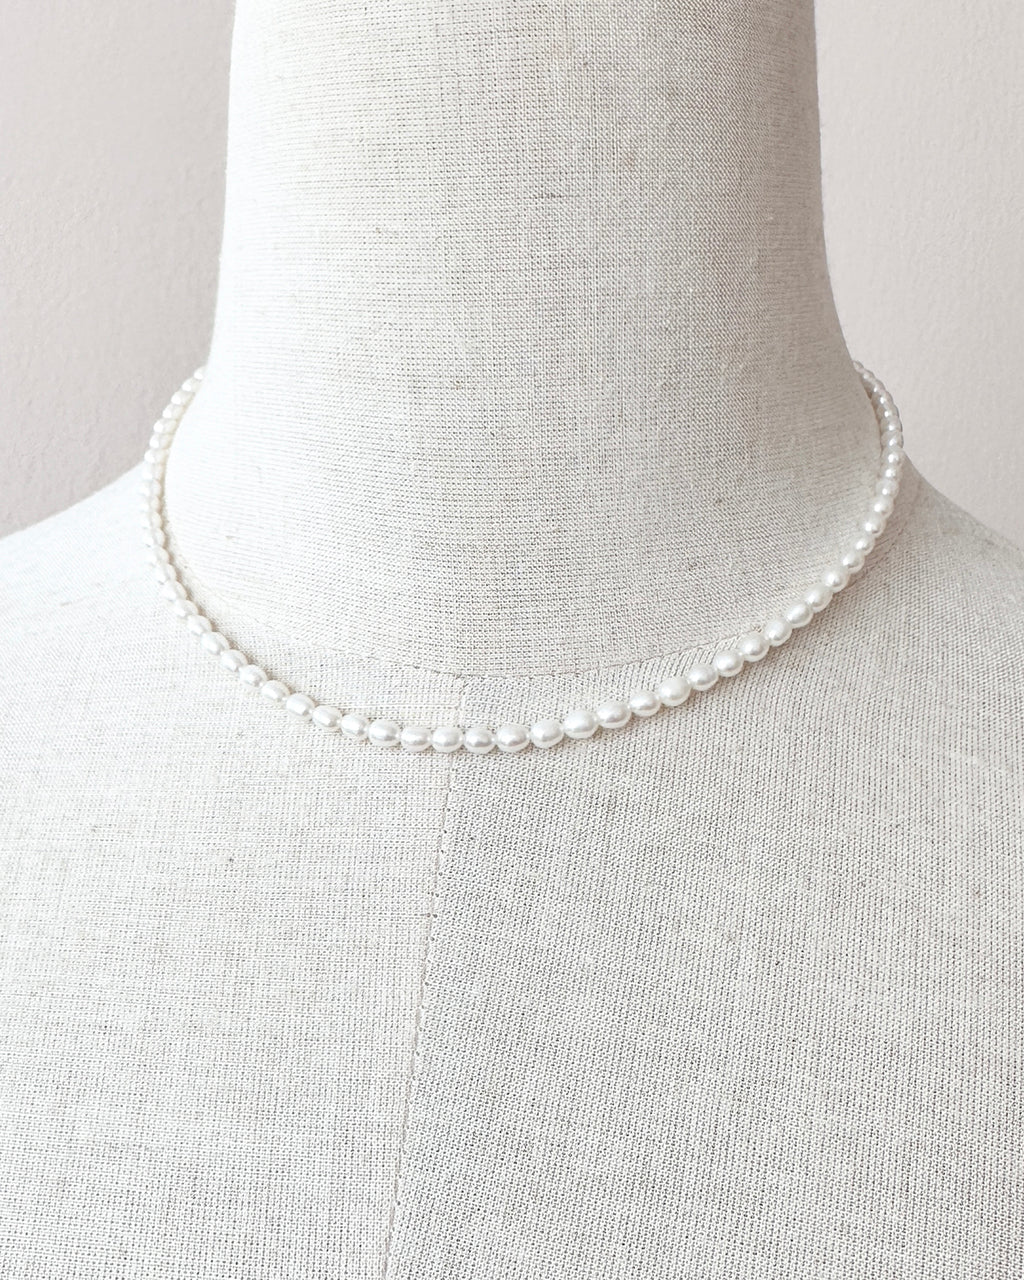 Tiny Pearl Necklace - White Freshwater Pearl Jewelry